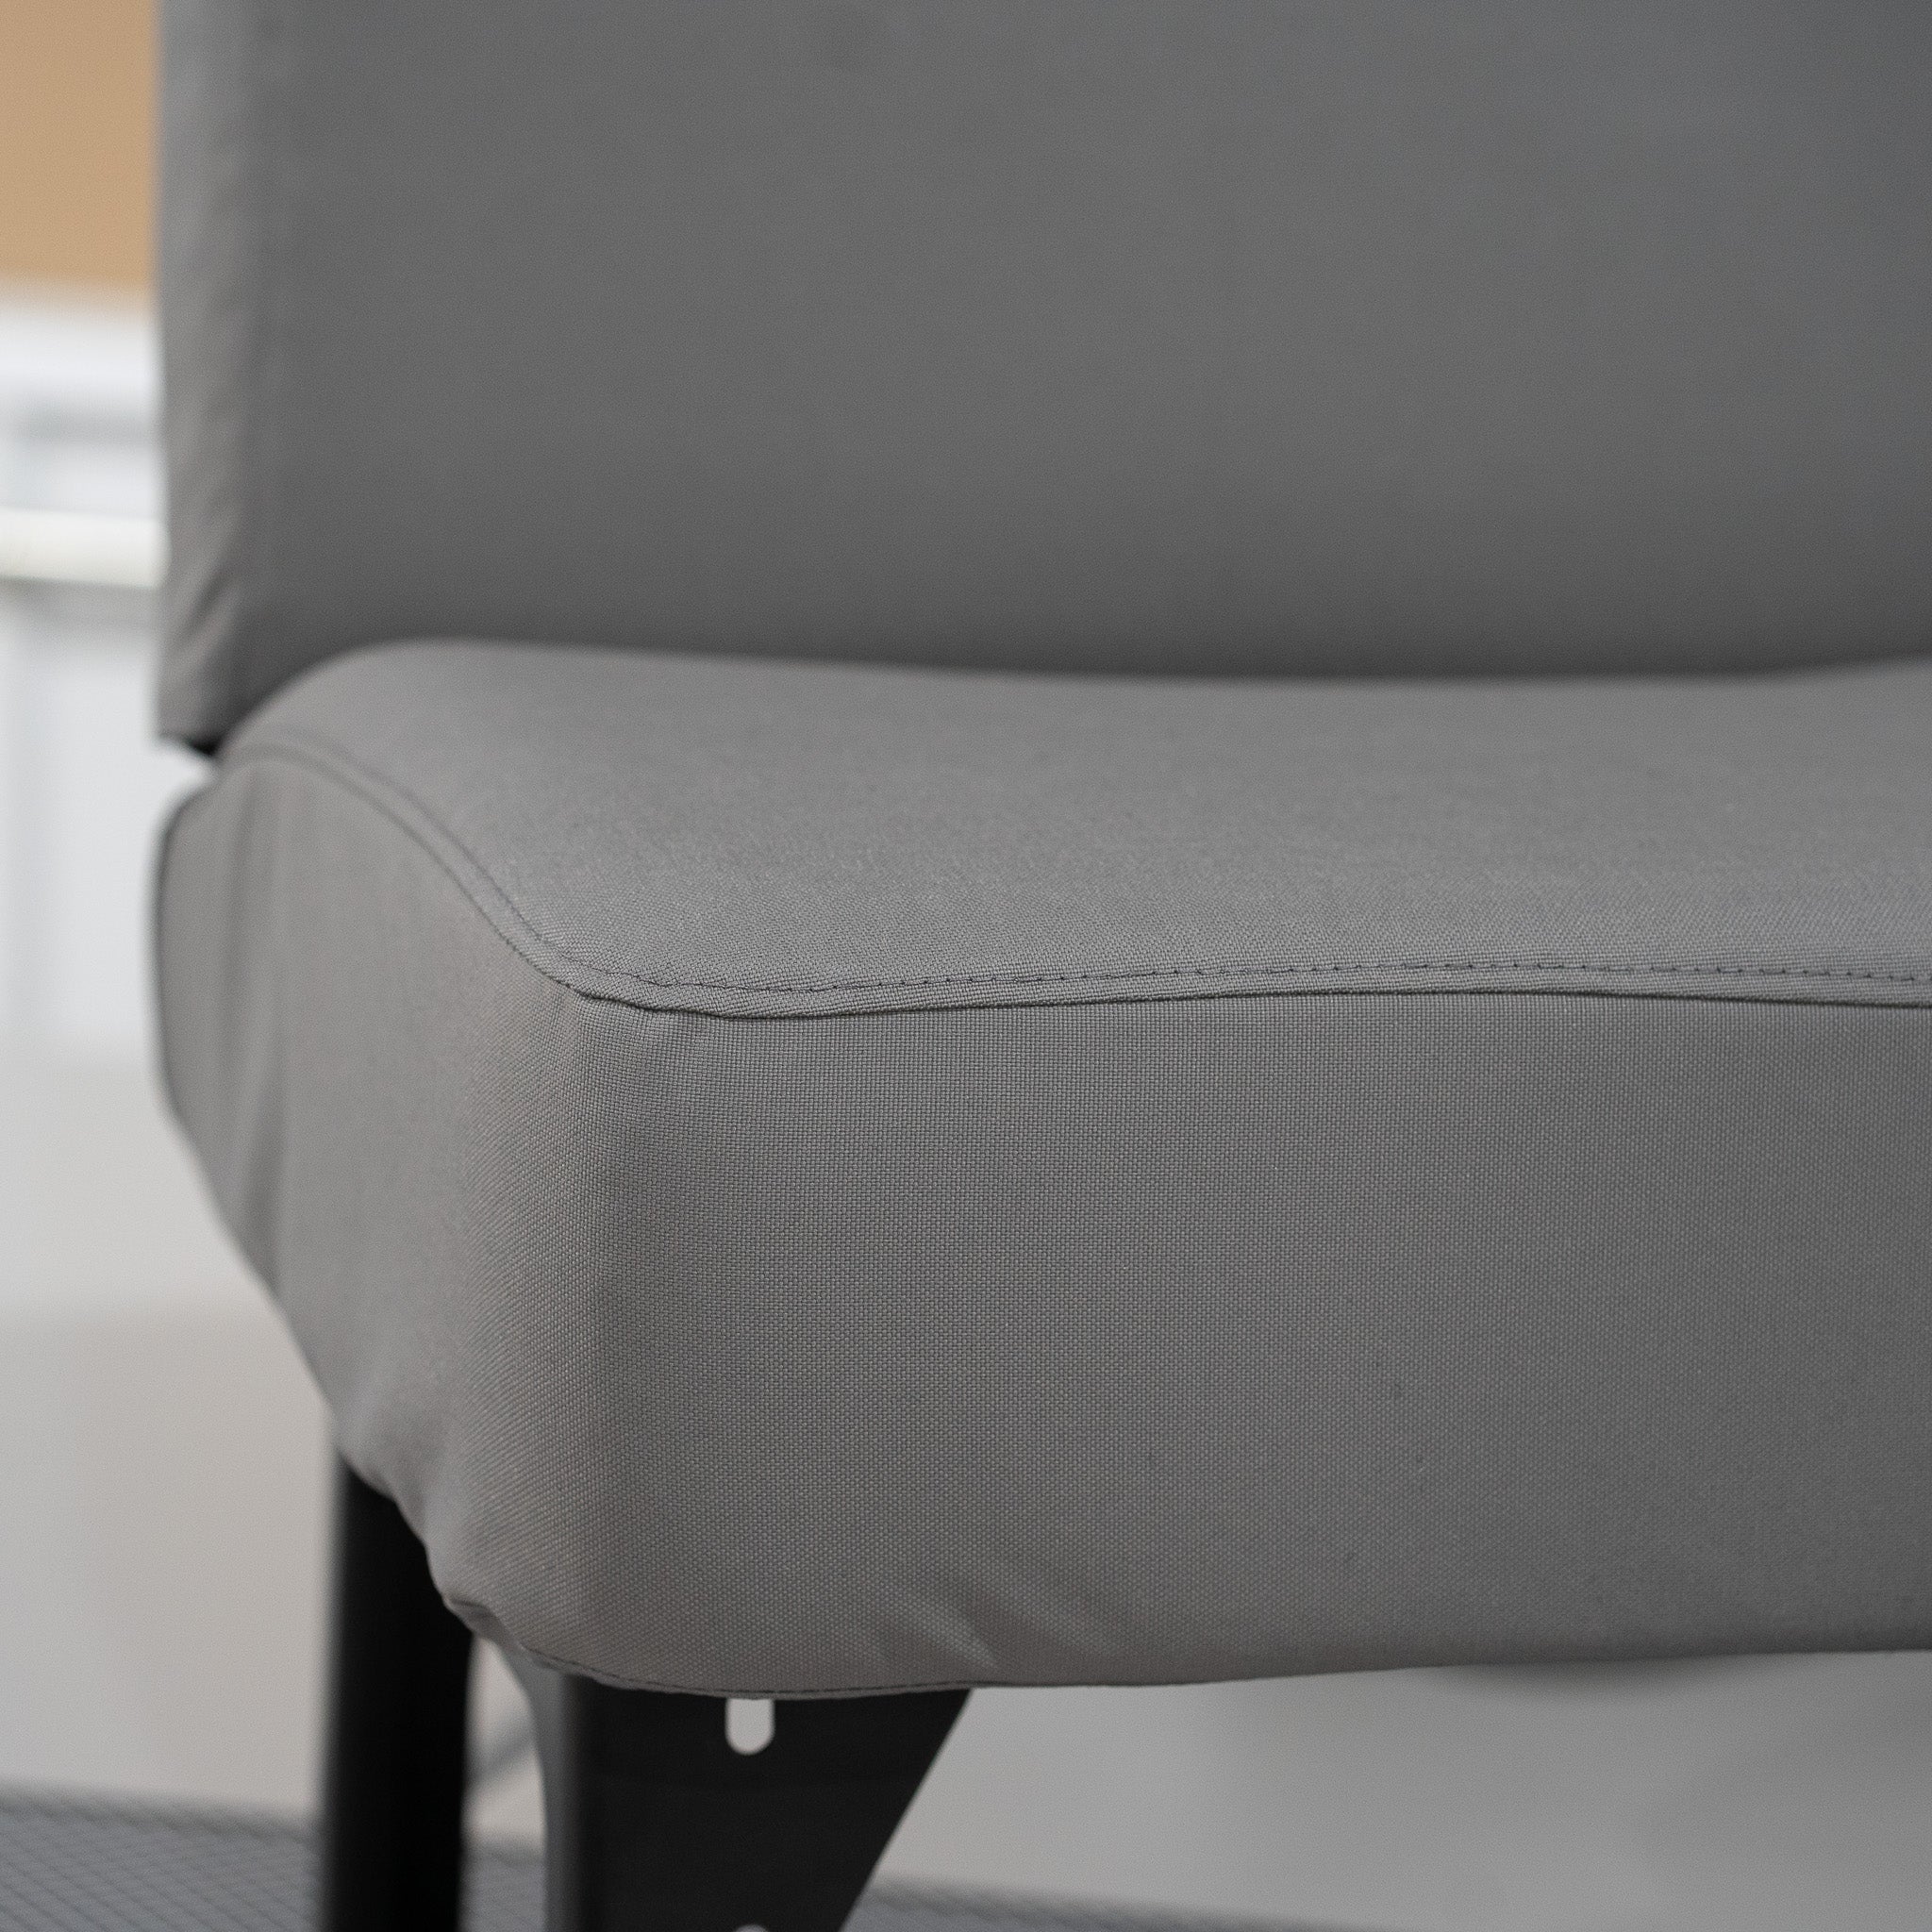 This picture shows the seam detail on the seat cover for a Hino passenger bench.